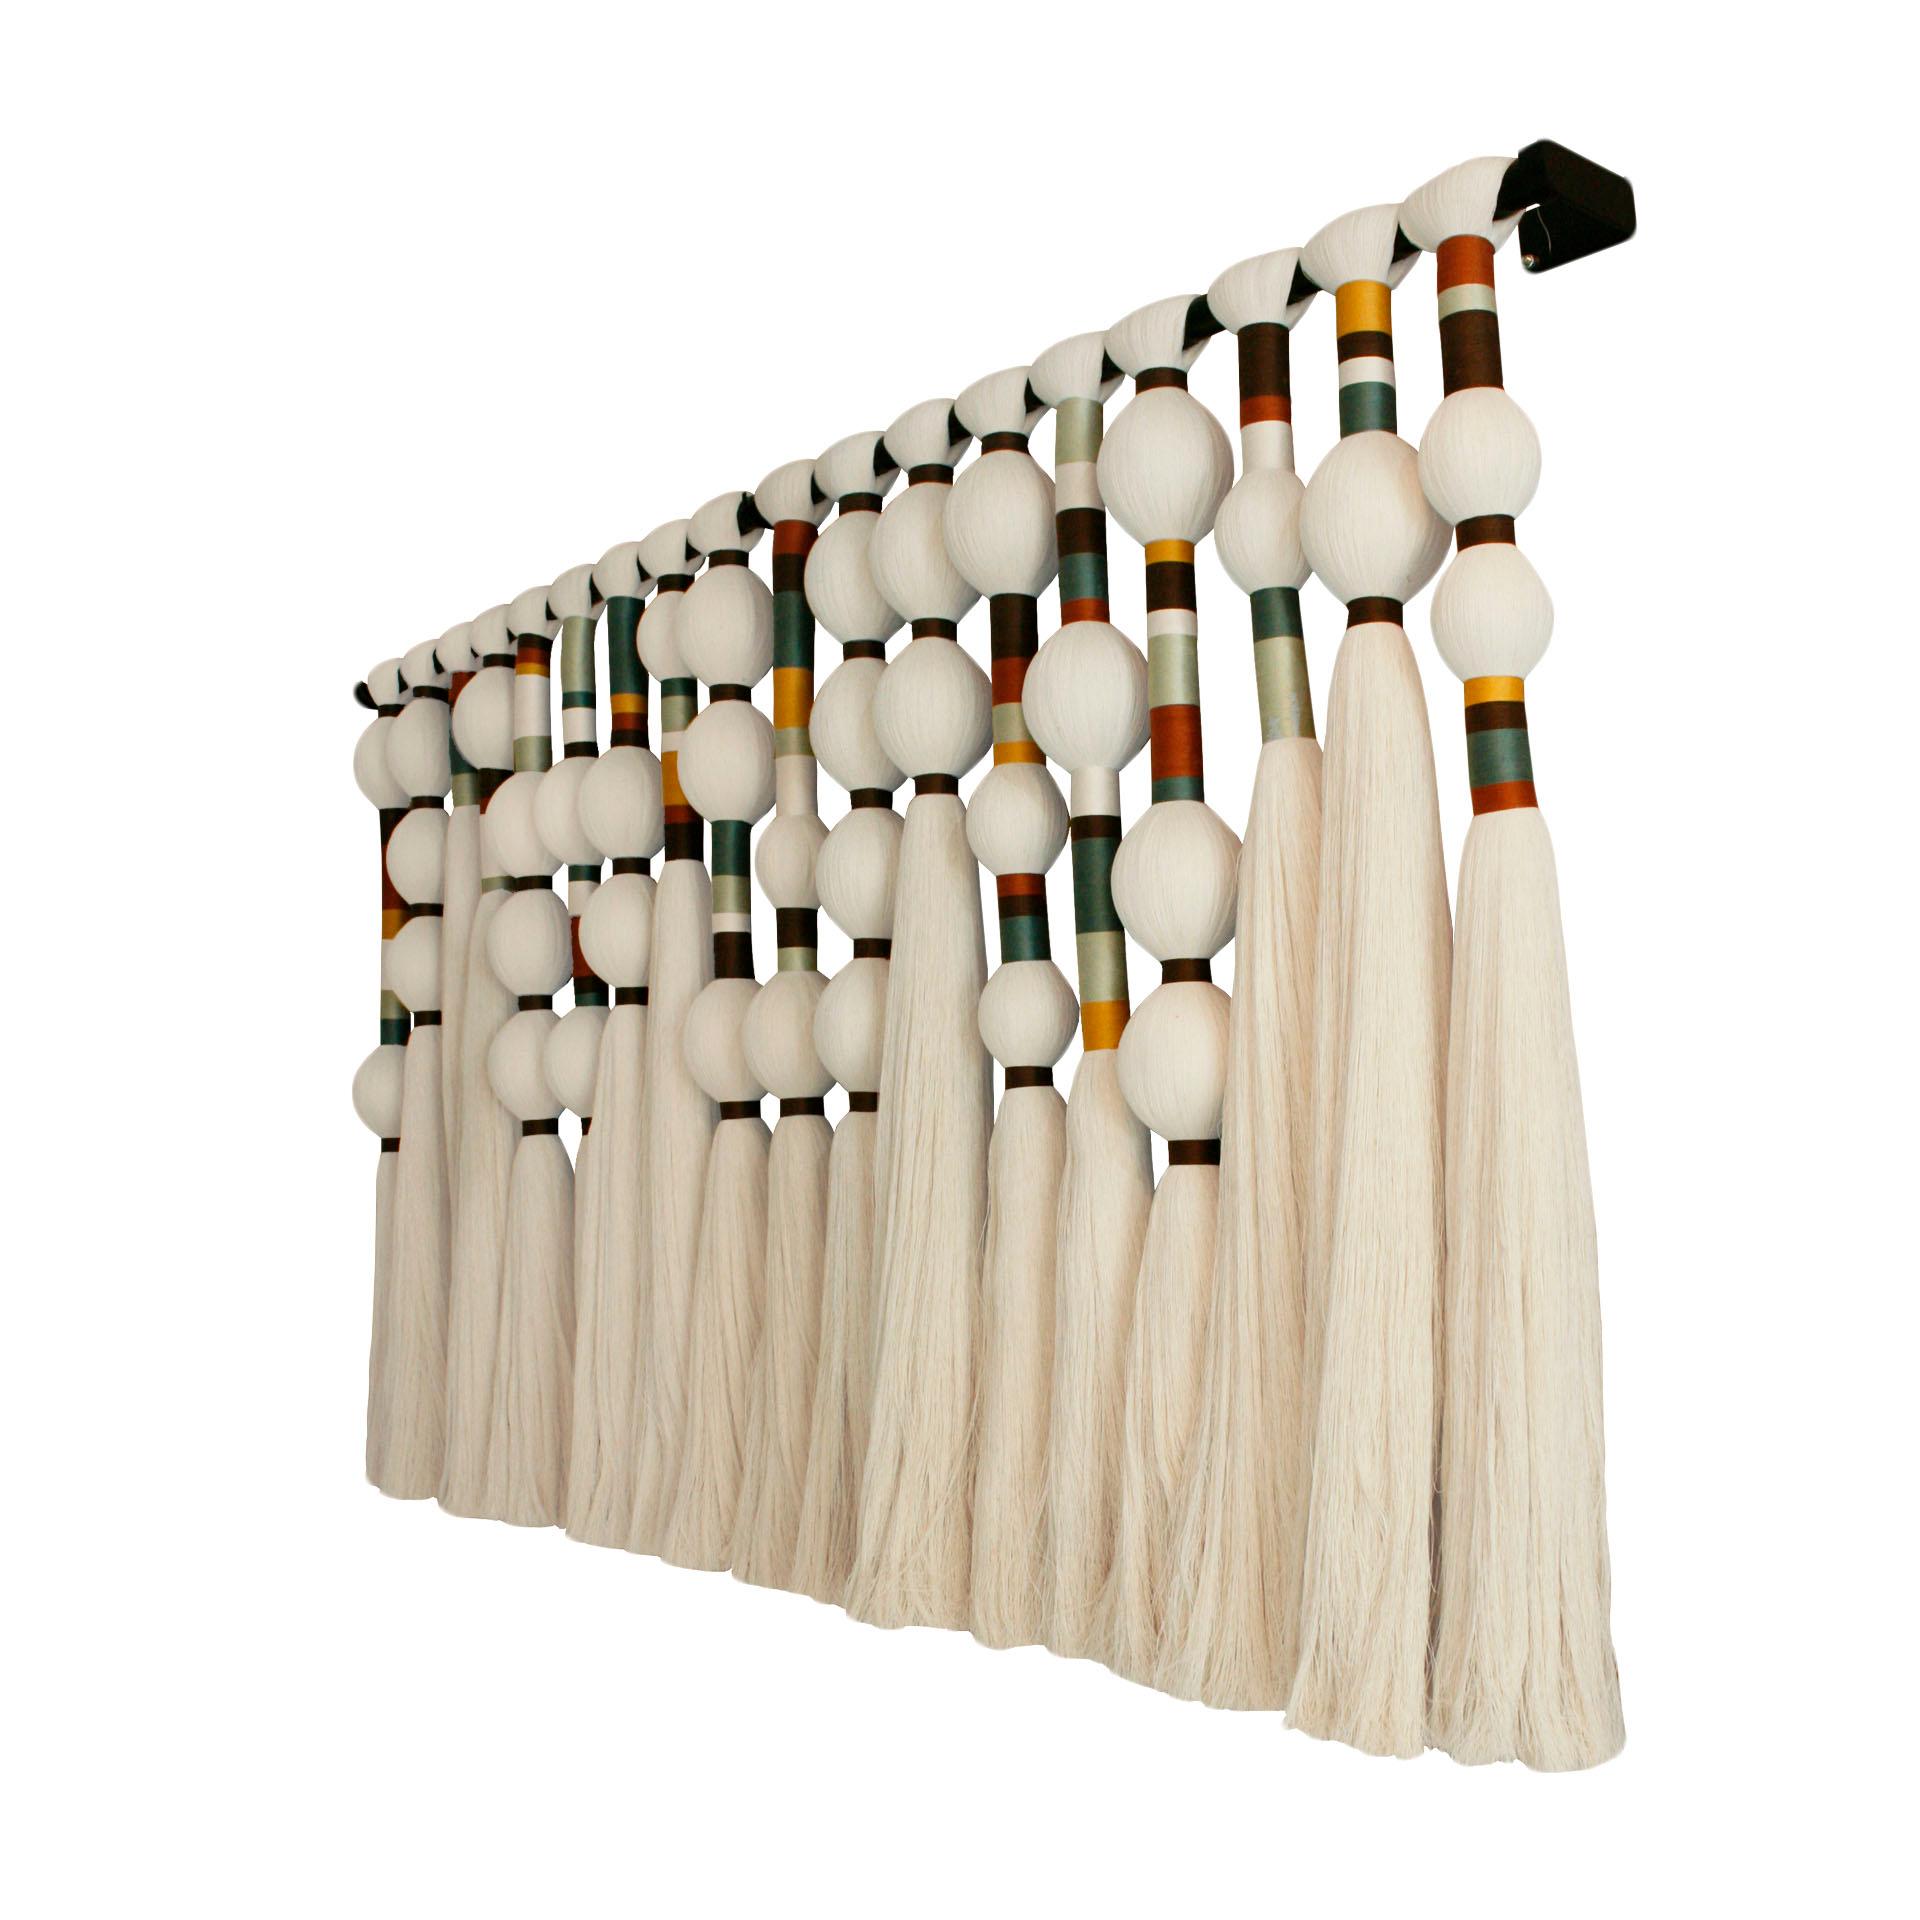 Large format wall-hanging sculpture handmade of 100% raw agave cotton thread. It has naturally dyed thread details in different shades. It is a contemporary reinterpretation of traditional geometric motifs of the indigenous cultures of South